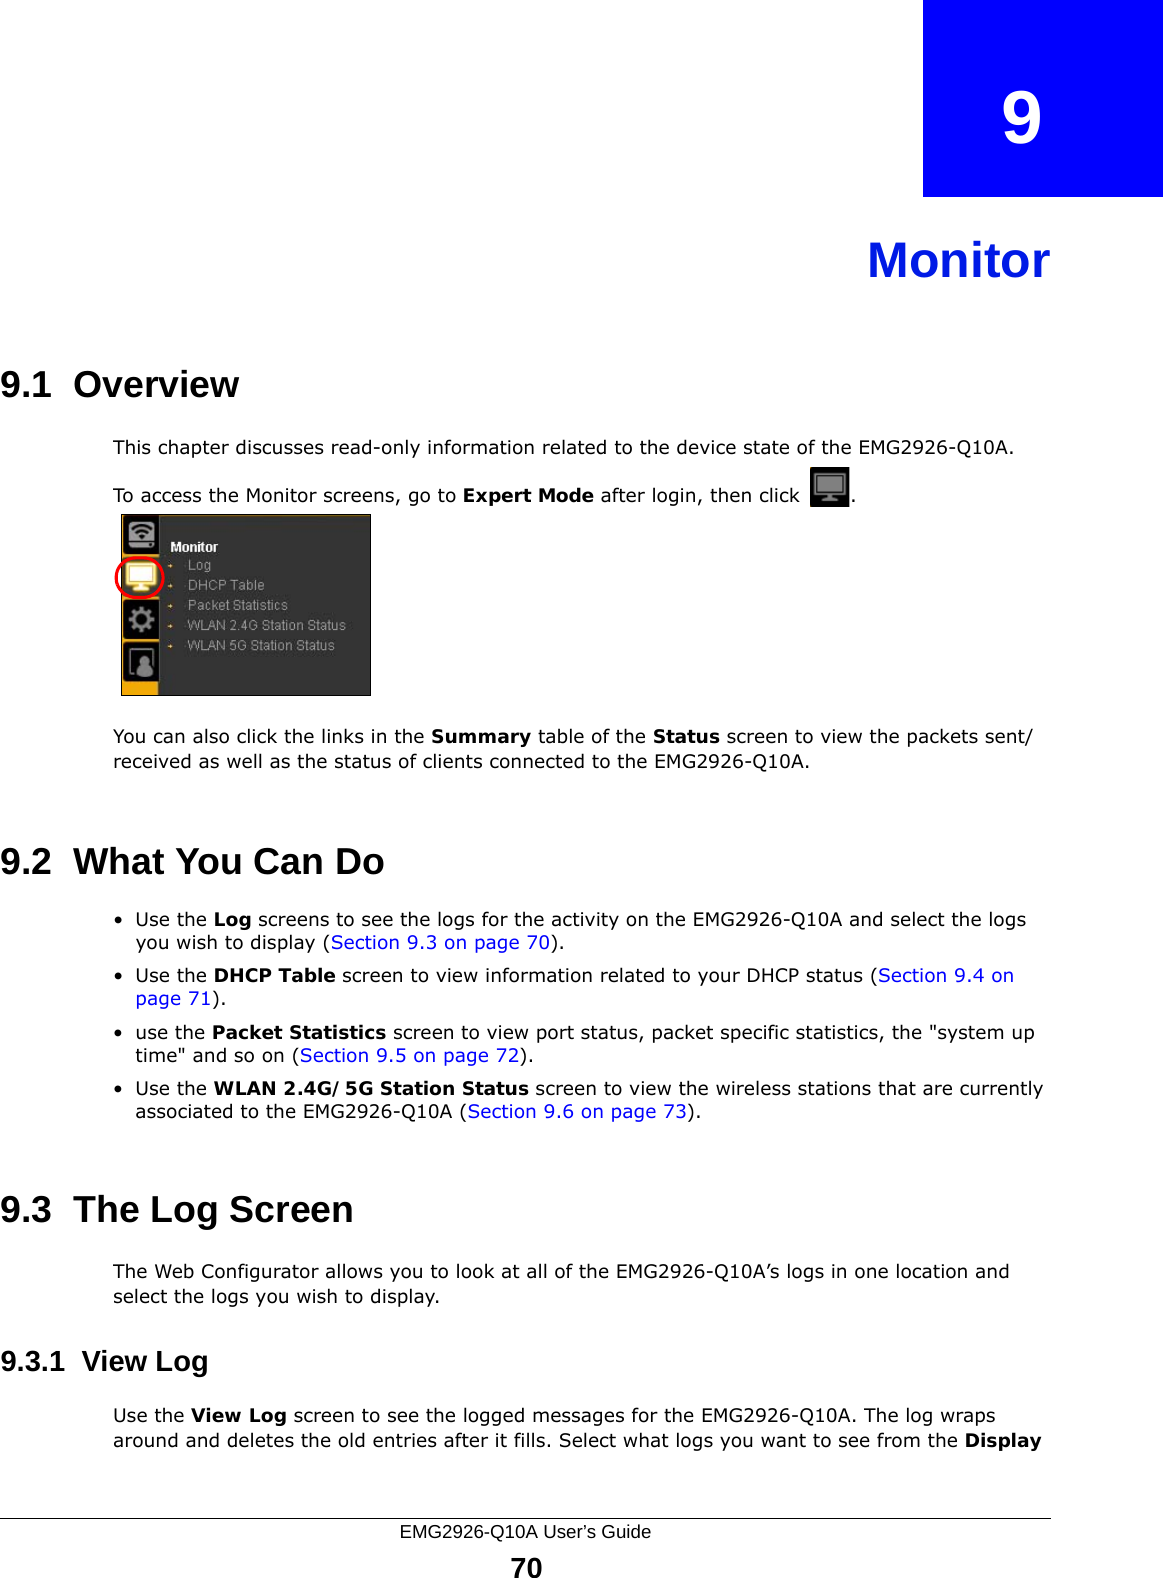 EMG2926-Q10A User’s Guide70CHAPTER   9Monitor9.1  OverviewThis chapter discusses read-only information related to the device state of the EMG2926-Q10A. To access the Monitor screens, go to Expert Mode after login, then click  .  You can also click the links in the Summary table of the Status screen to view the packets sent/received as well as the status of clients connected to the EMG2926-Q10A.9.2  What You Can Do•Use the Log screens to see the logs for the activity on the EMG2926-Q10A and select the logs you wish to display (Section 9.3 on page 70).•Use the DHCP Table screen to view information related to your DHCP status (Section 9.4 on page 71).•use the Packet Statistics screen to view port status, packet specific statistics, the &quot;system up time&quot; and so on (Section 9.5 on page 72).•Use the WLAN 2.4G/5G Station Status screen to view the wireless stations that are currently associated to the EMG2926-Q10A (Section 9.6 on page 73).9.3  The Log ScreenThe Web Configurator allows you to look at all of the EMG2926-Q10A’s logs in one location and select the logs you wish to display.9.3.1  View LogUse the View Log screen to see the logged messages for the EMG2926-Q10A. The log wraps around and deletes the old entries after it fills. Select what logs you want to see from the Display 